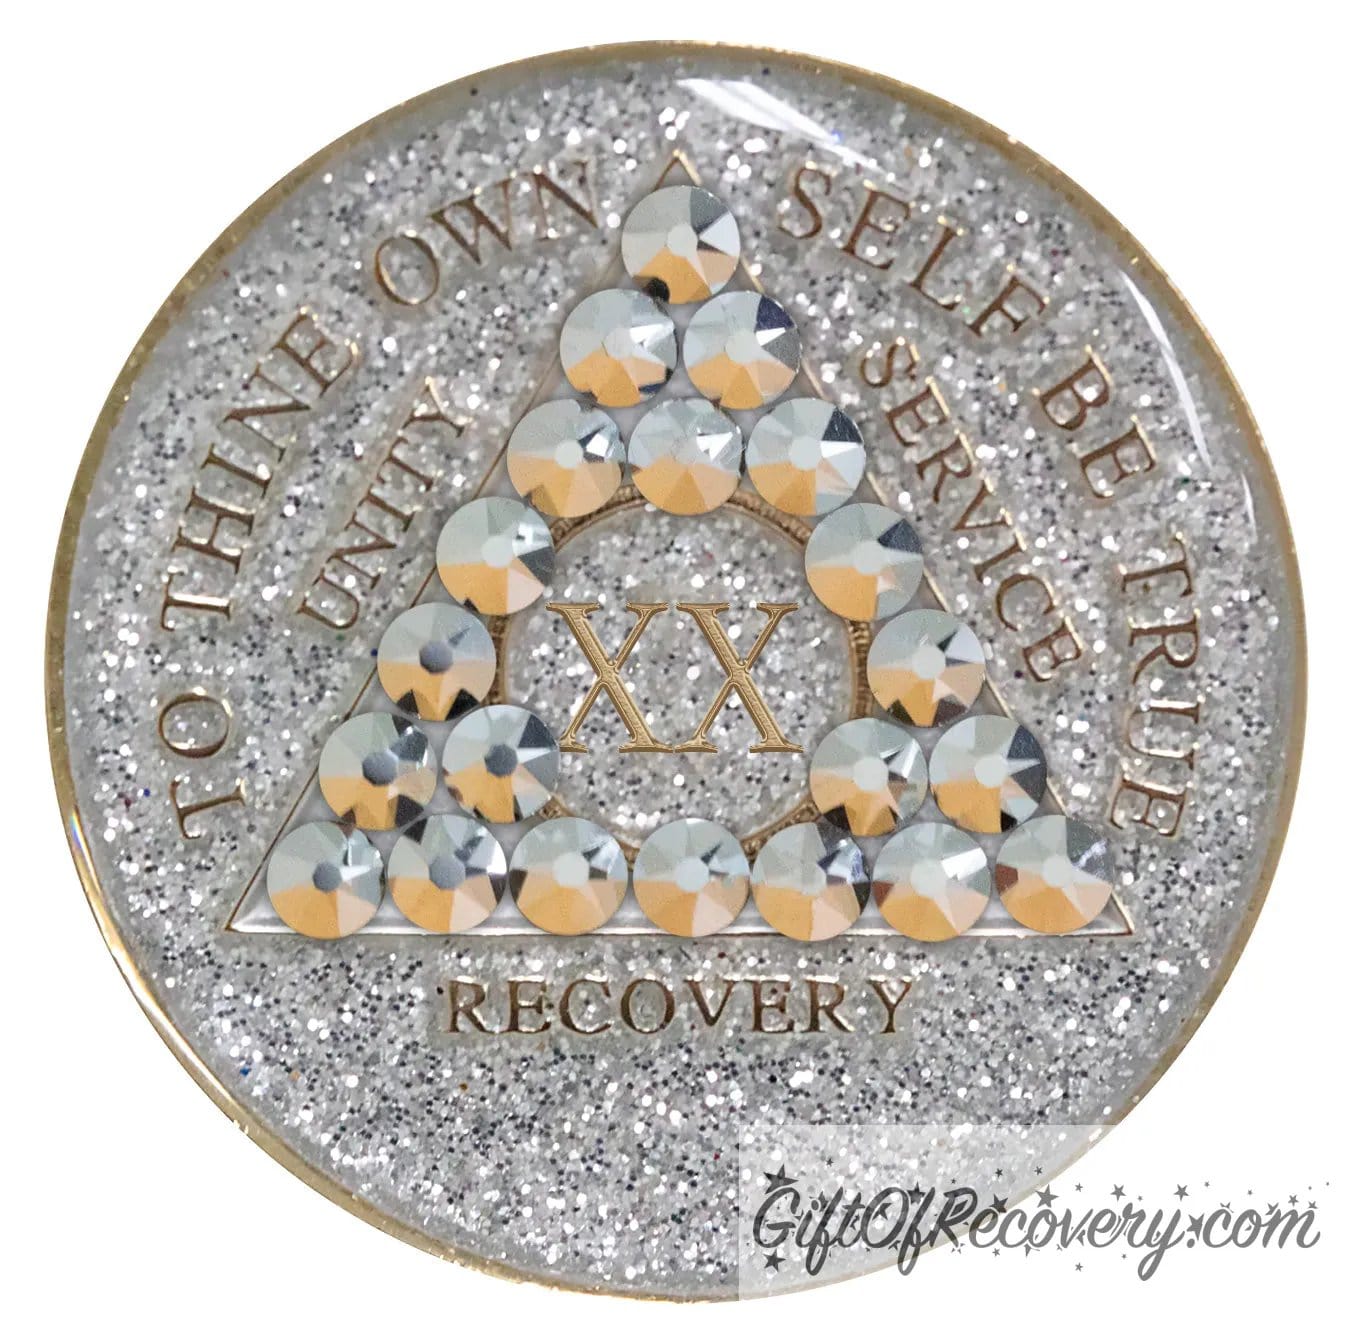 20 year silver glitter AA medallion with 21 genuine comet crystals, forming a triangle around the 1 year, while the year, unity, service, recovery, rim, and To Thine Own Self Be True are embossed in 14k gold, sealed with resin to give it a glossy finish, hand painted and scratch resistant.